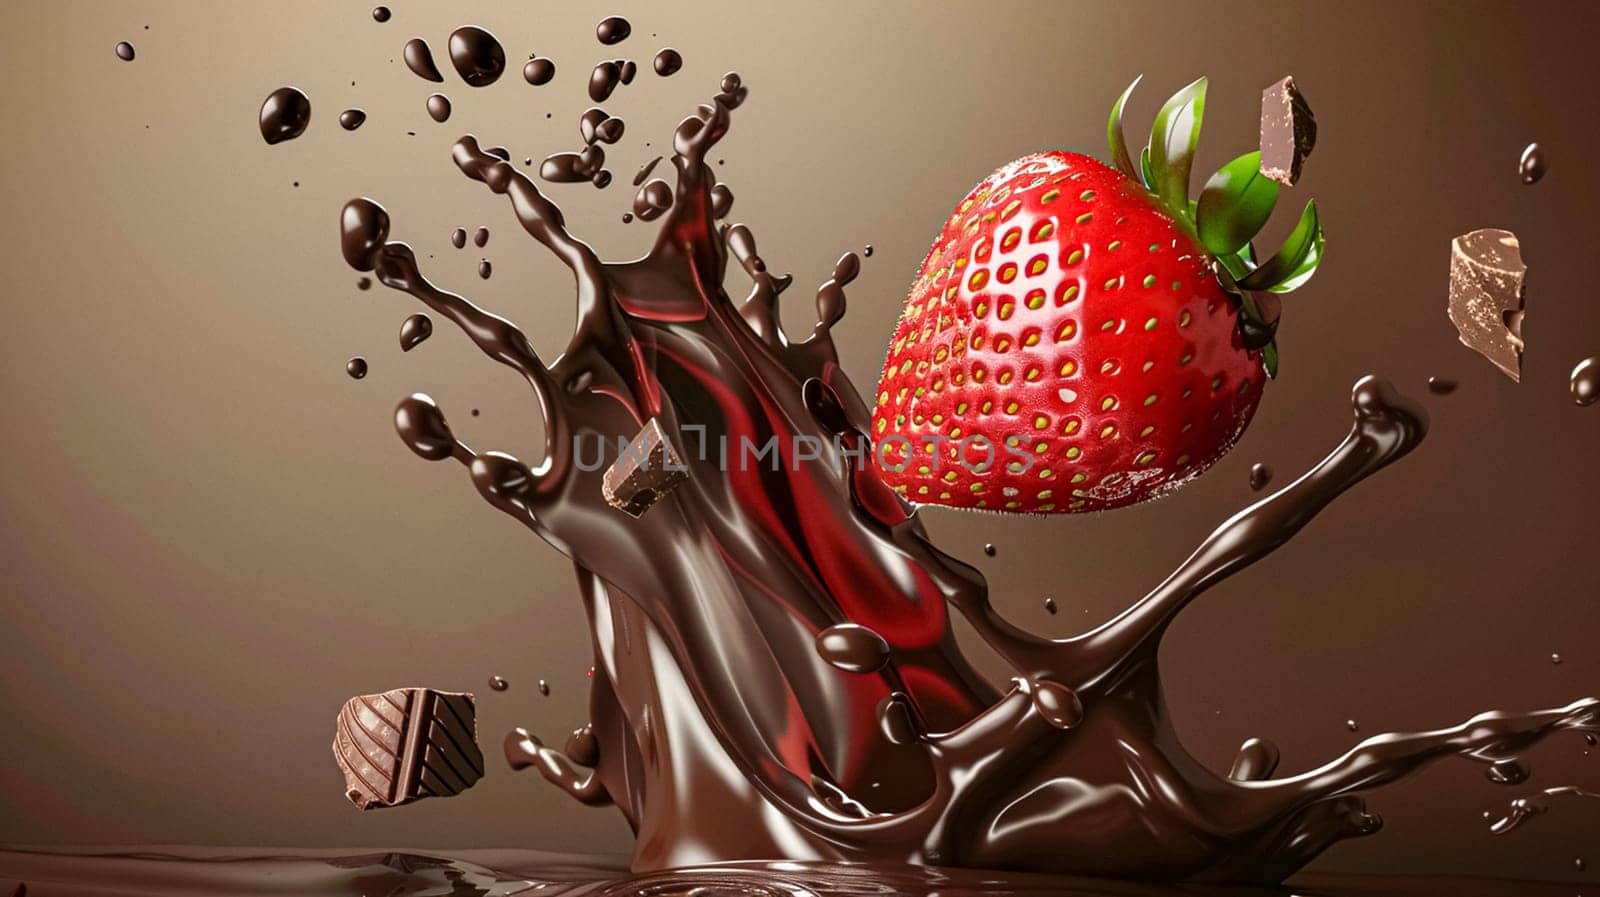 Strawberry falling into melted liquid chocolate, food dessert and confectionery industry by Anneleven